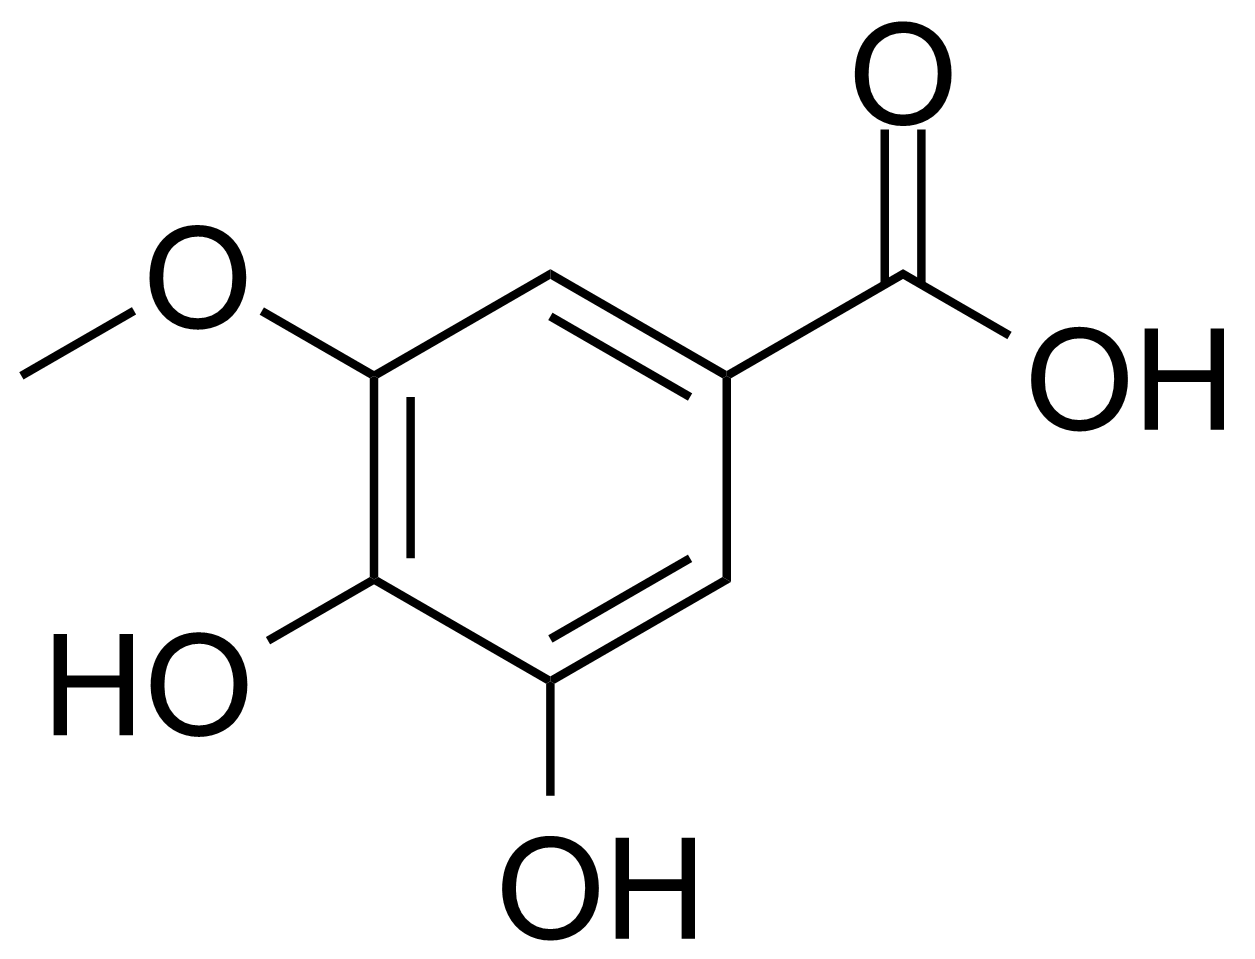 Structure of 3,4-Dihydroxy-5-methoxybenzoic acid